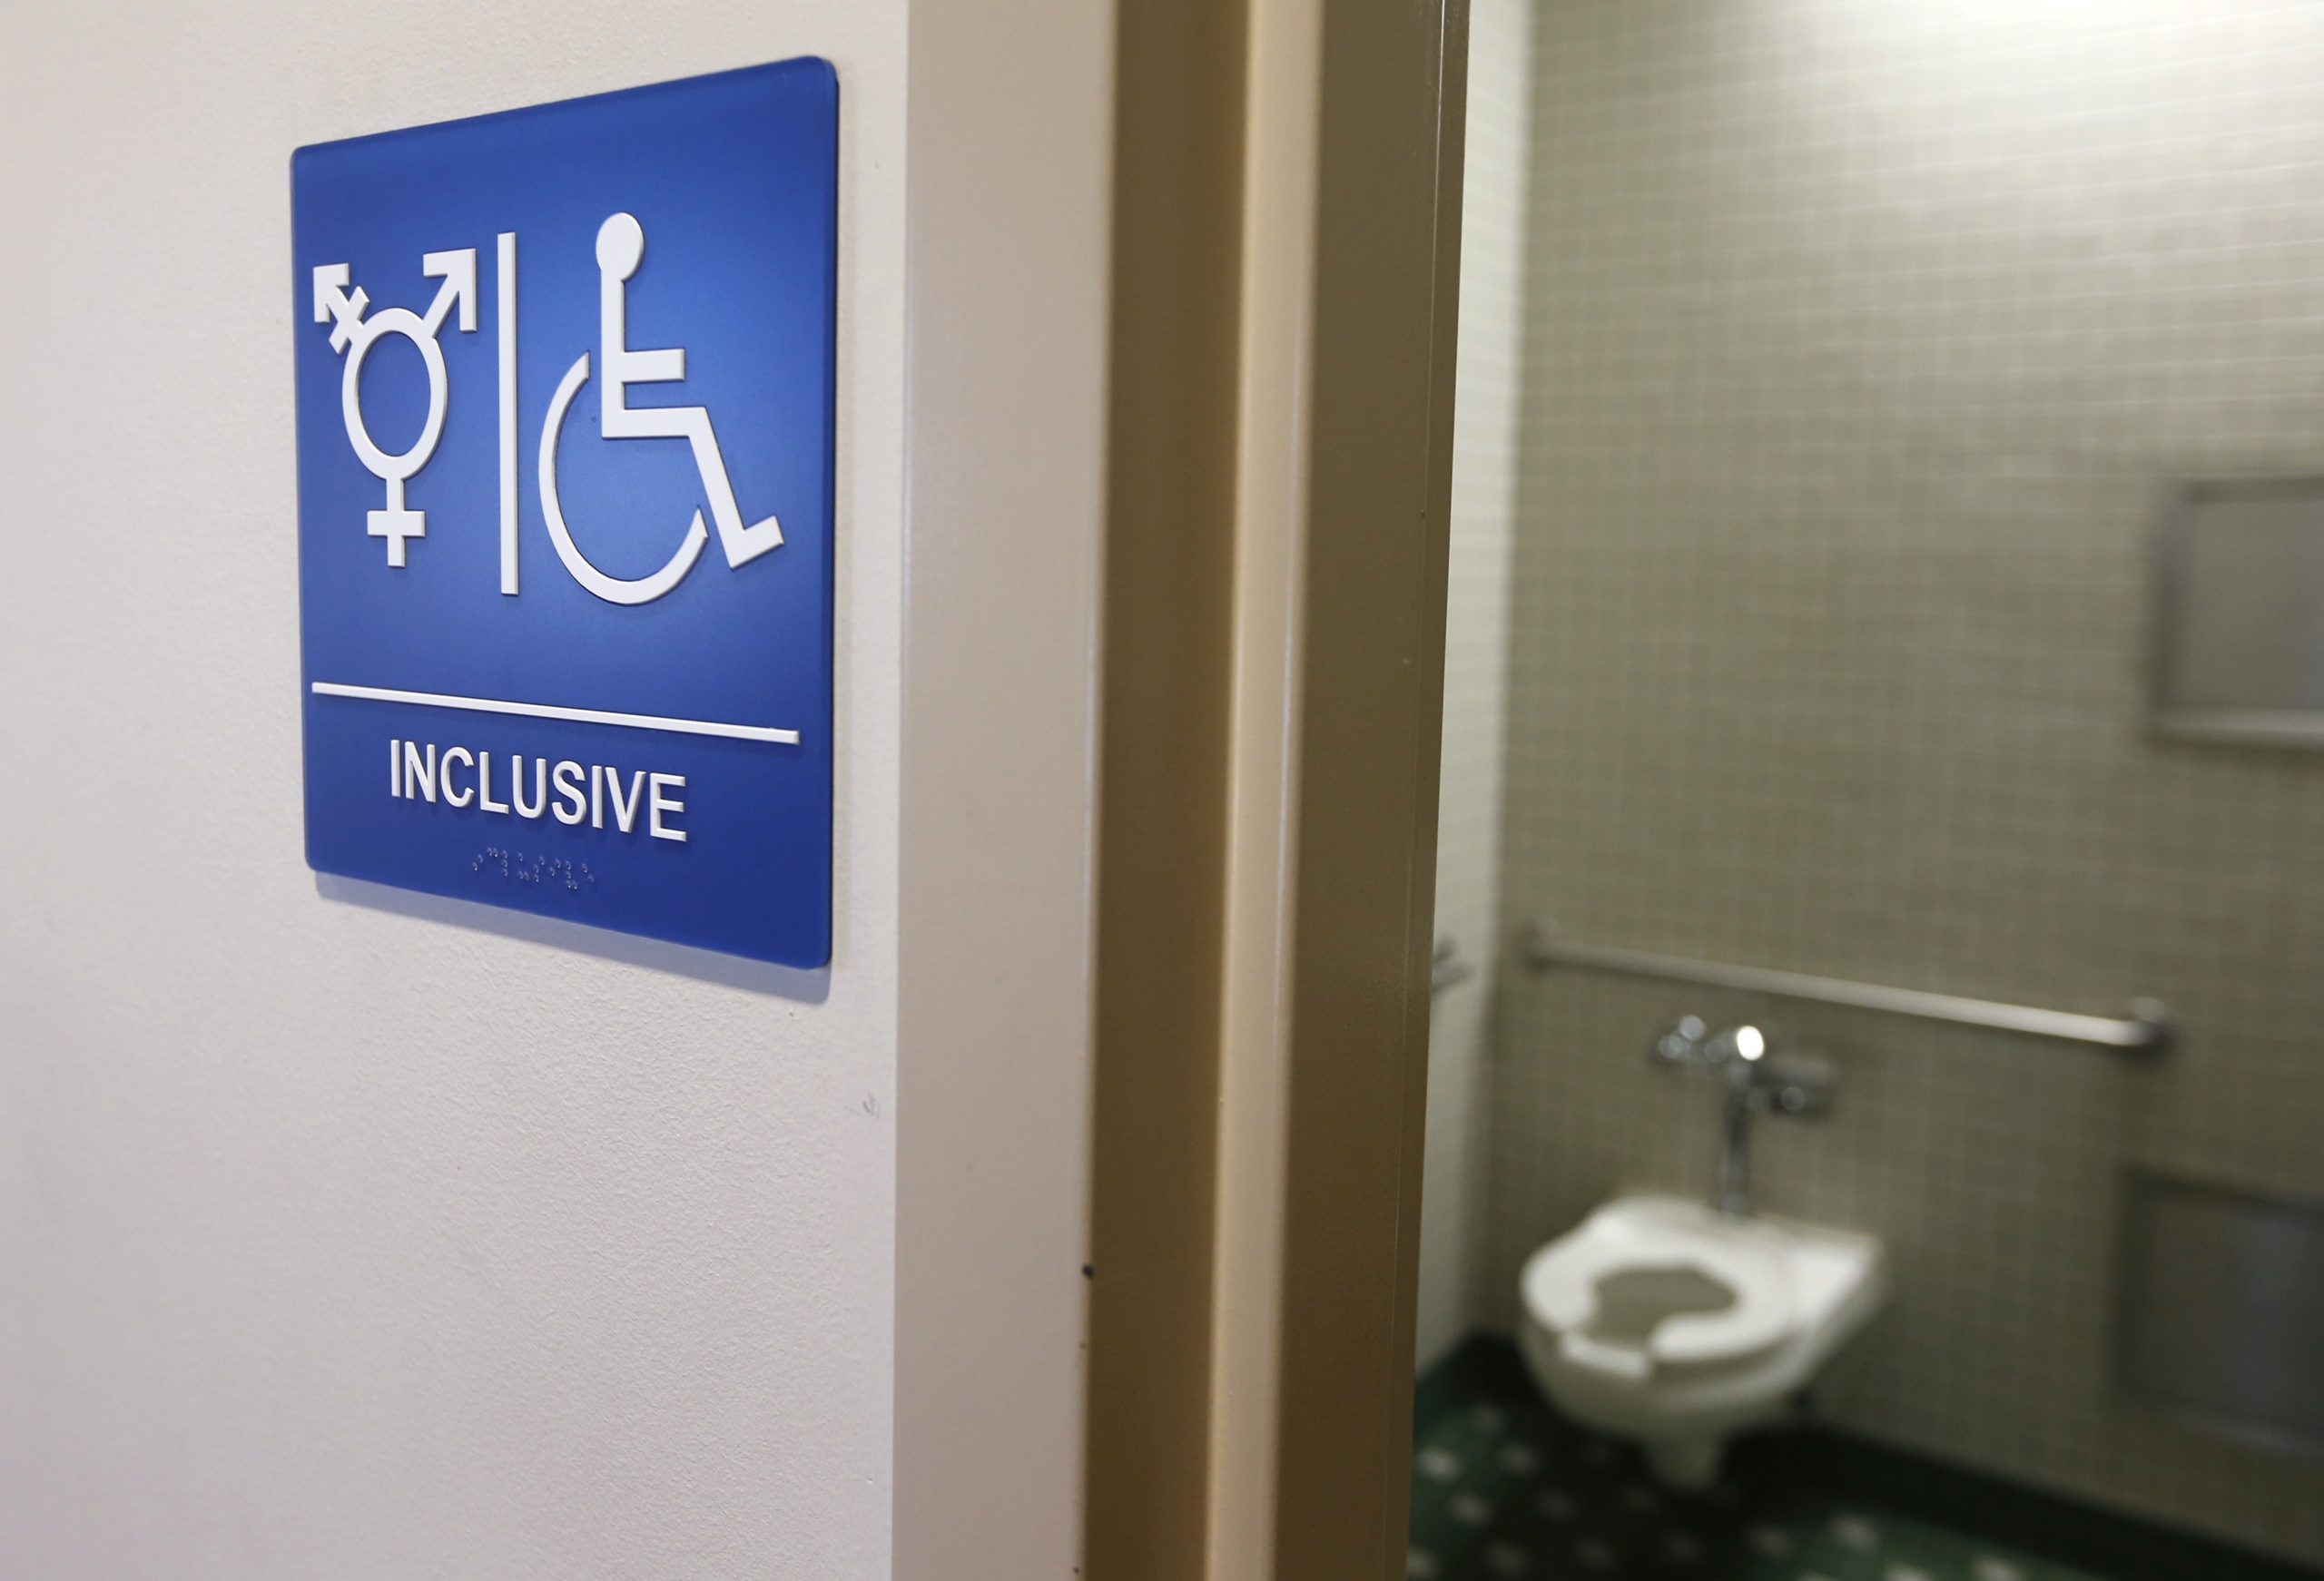 Photo of bathroom with sign that says “Inclusive” and has trans and disability icon